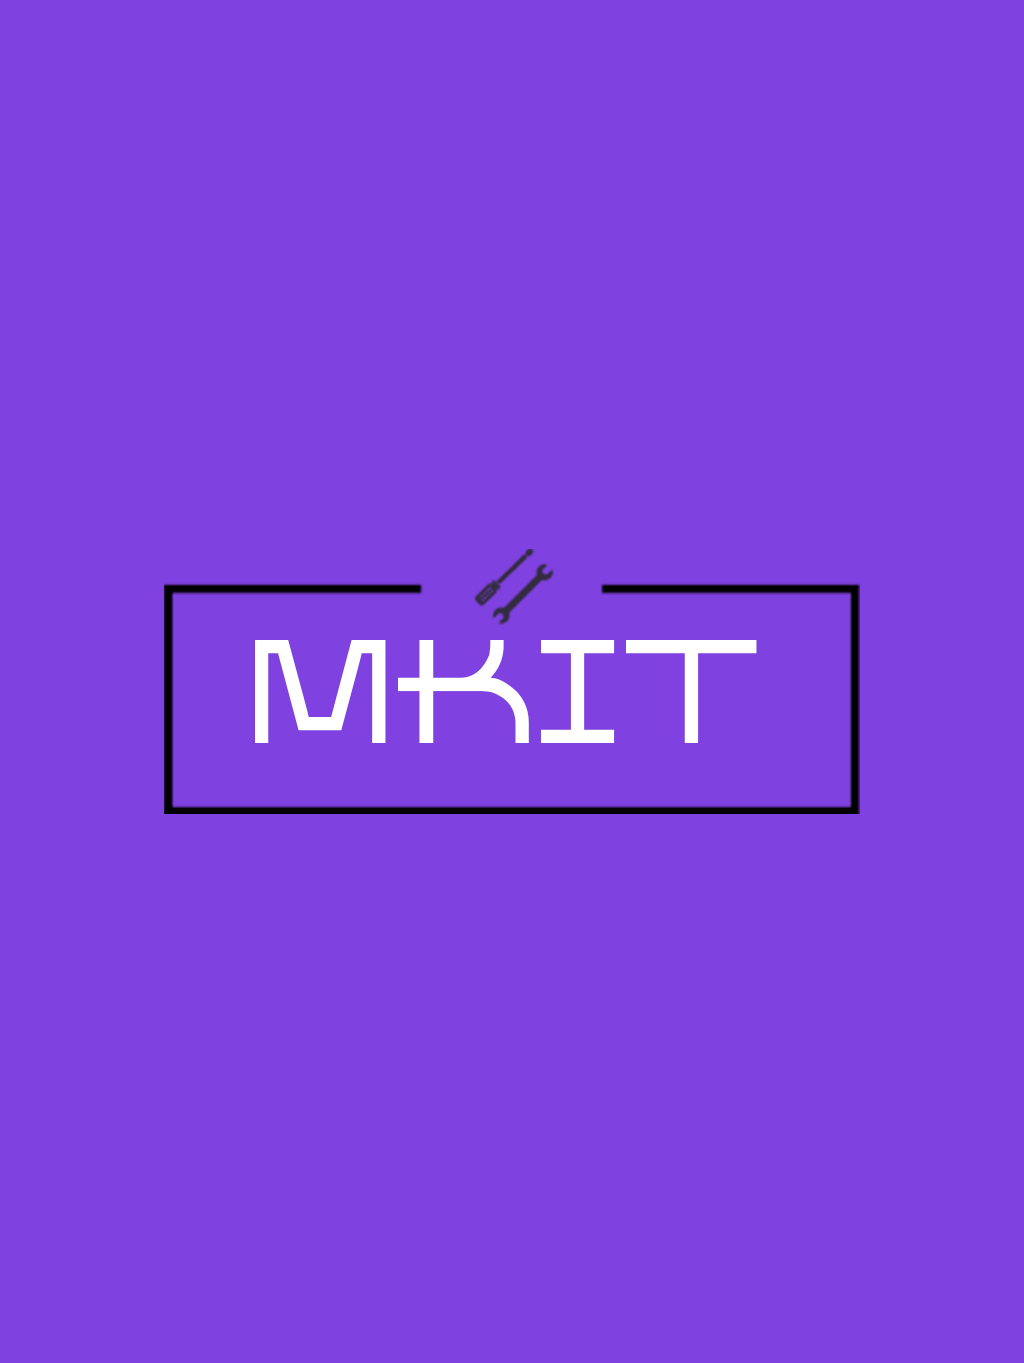 Mkit